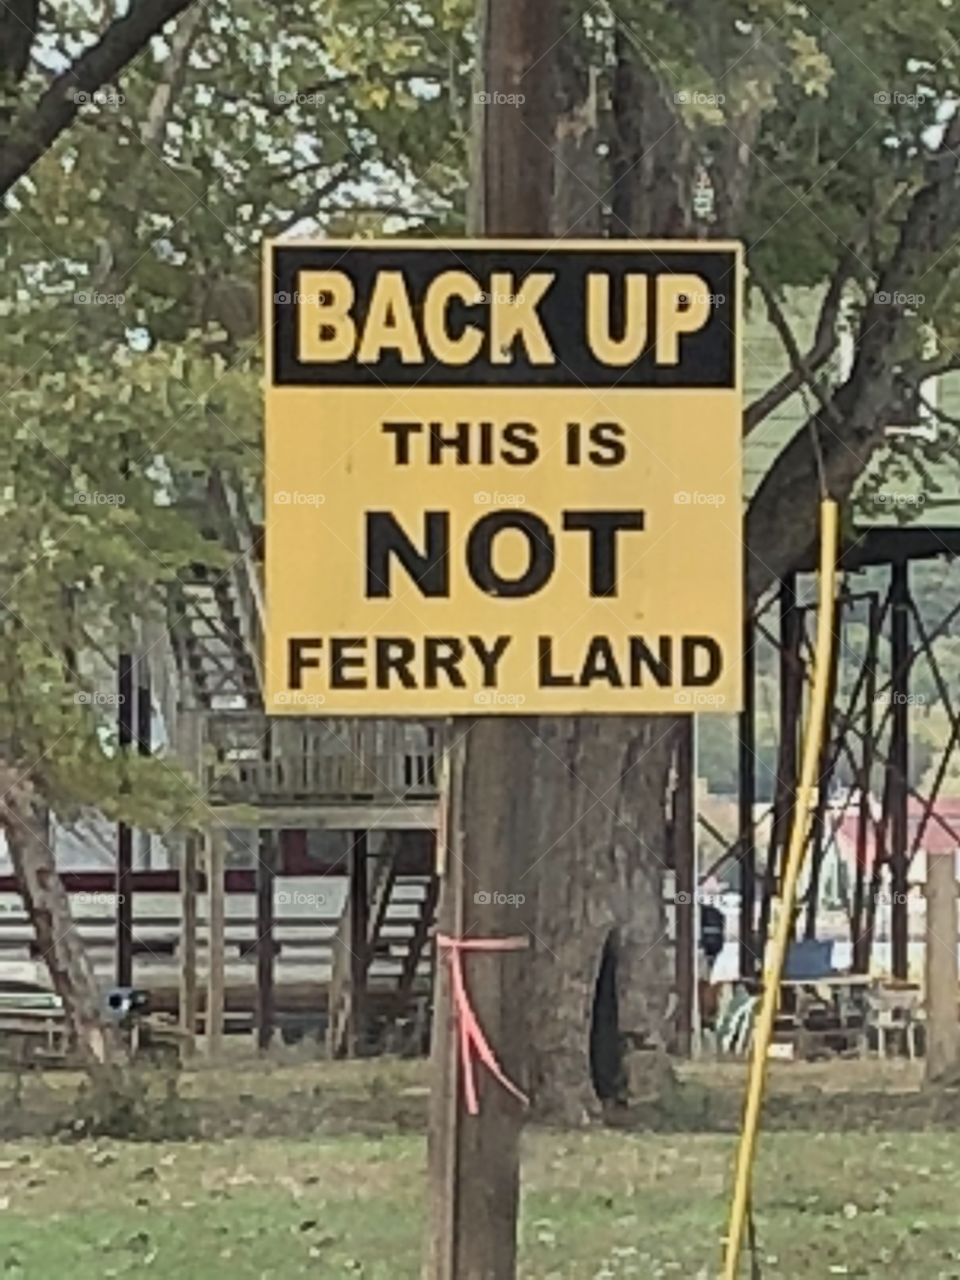 Back Up This Is Not Ferry Land sign on private property near the Grafton Ferry in Grafton, Illinois, USA